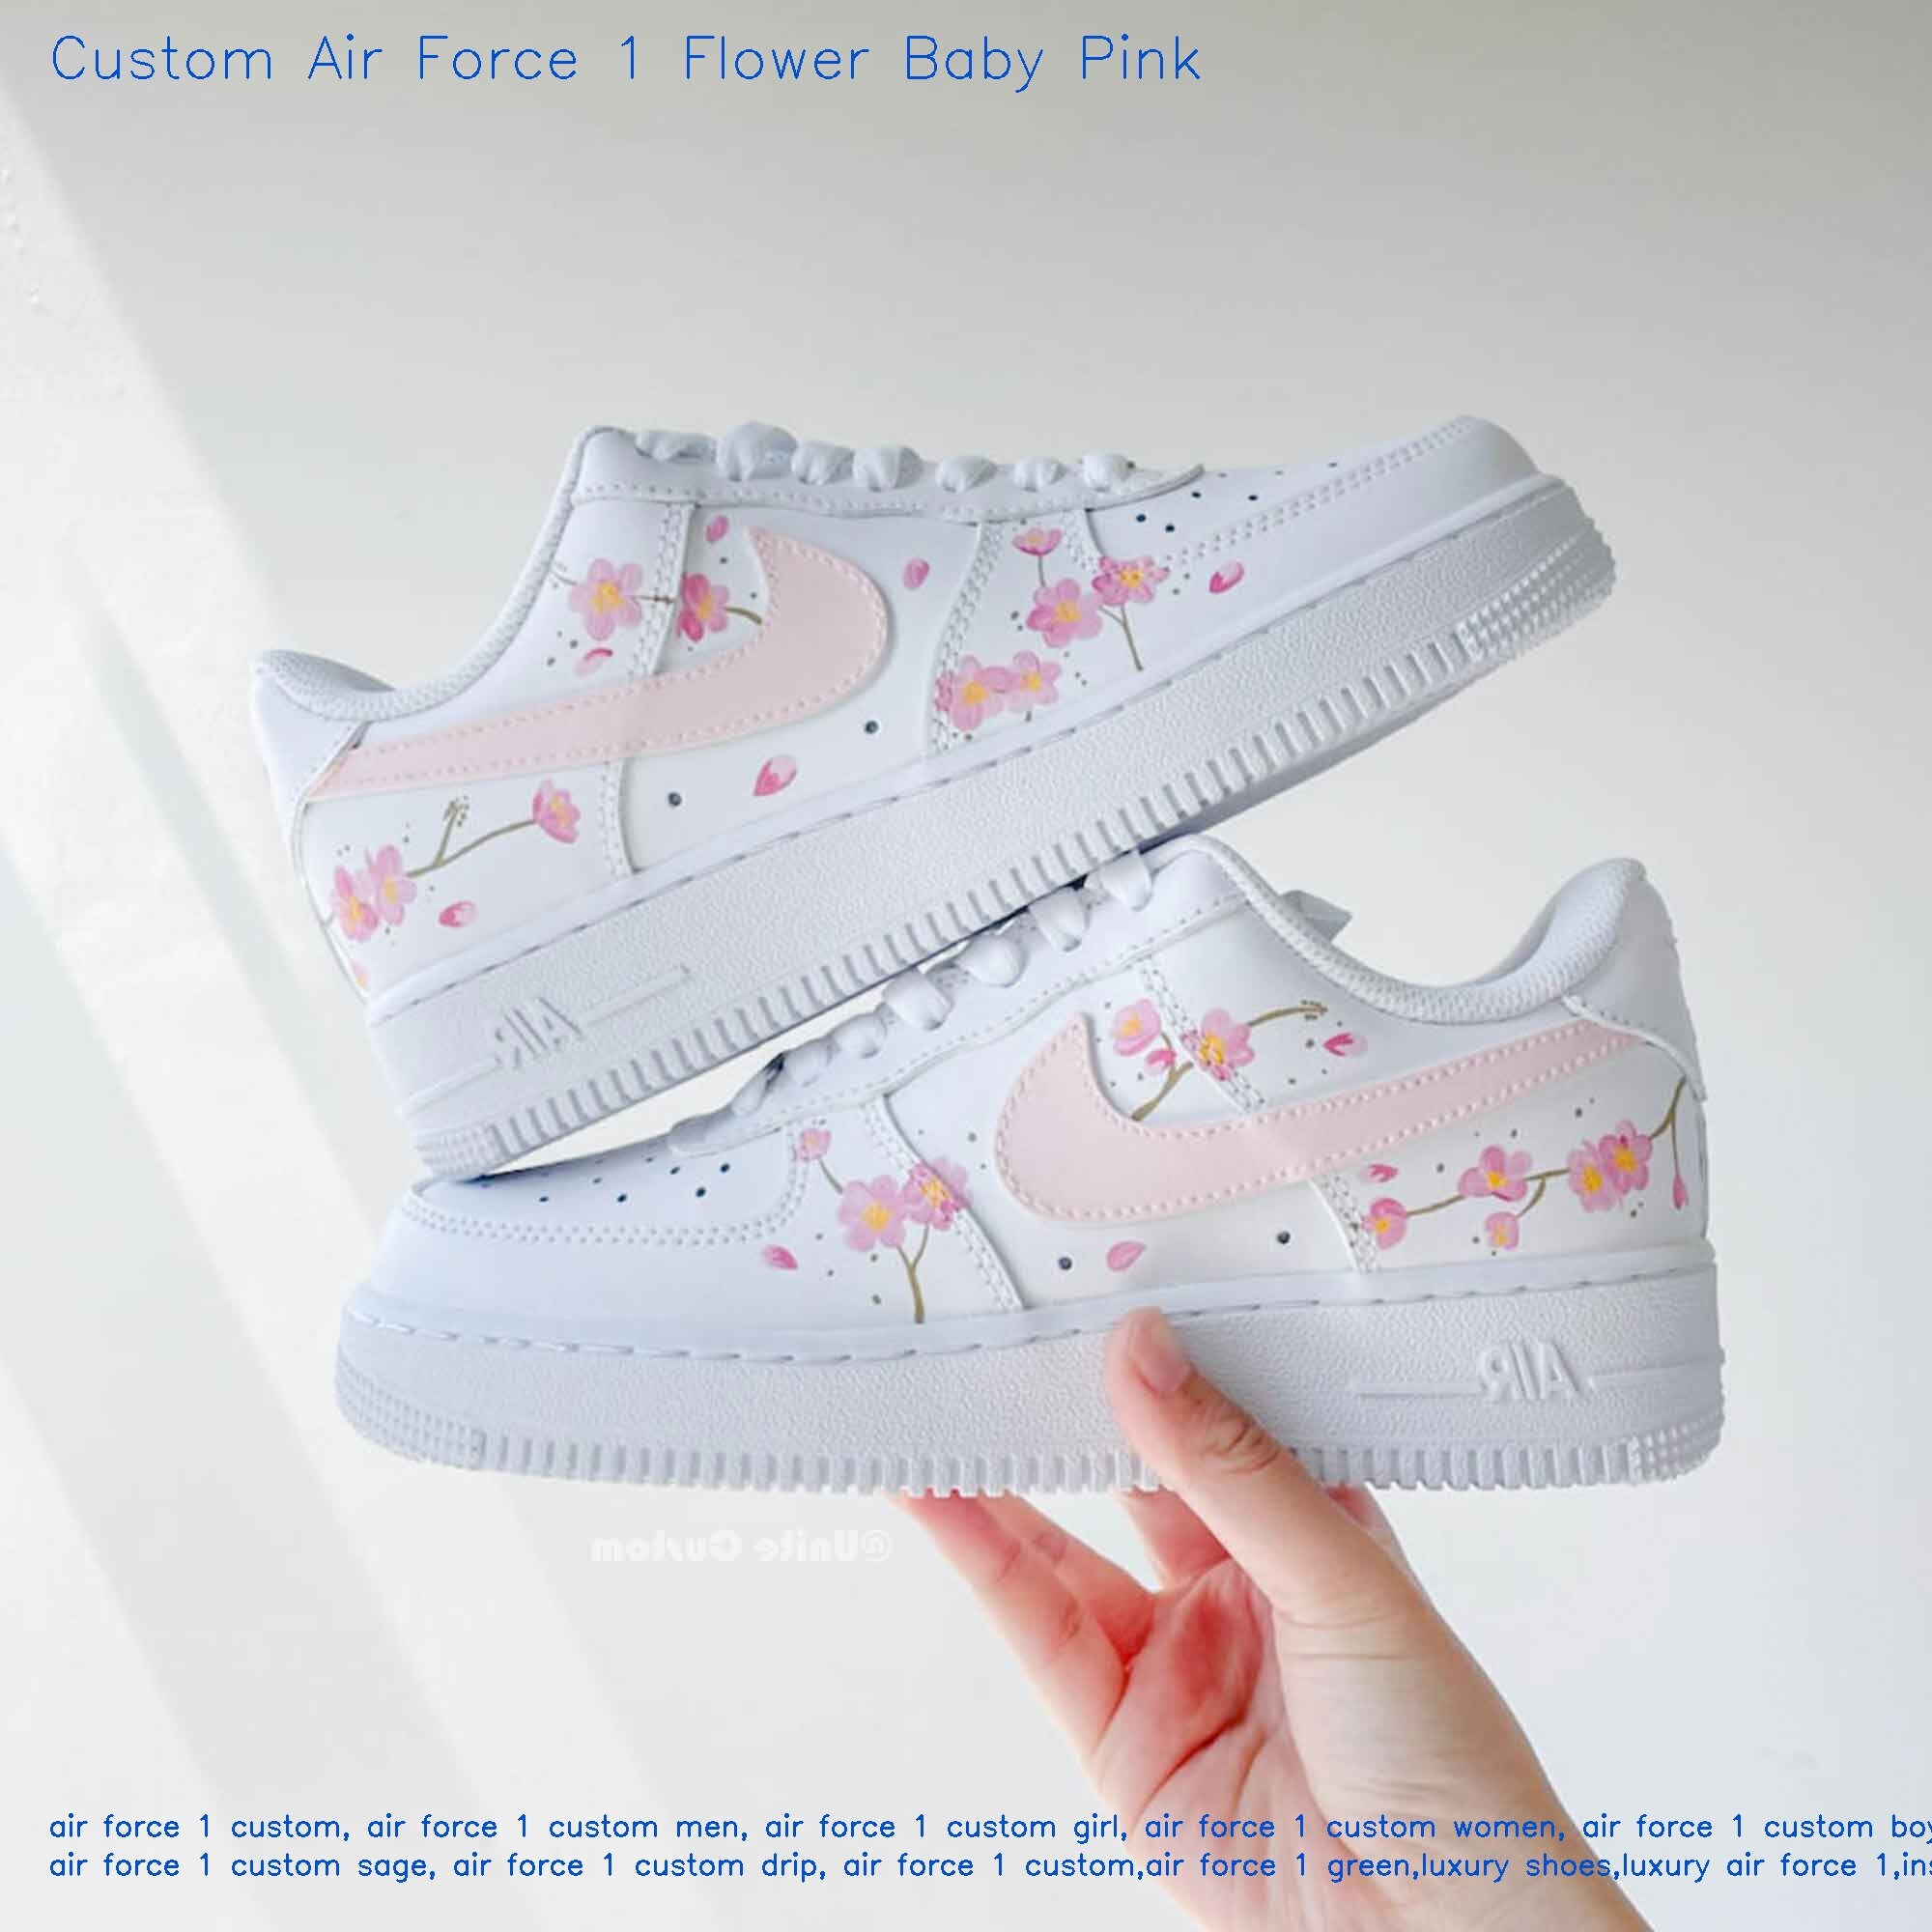 Custom Hand Painted Gucci LV Supreme Nike AF1 Air Force 1 Low Shoes, Listing Not For Sale - Read De